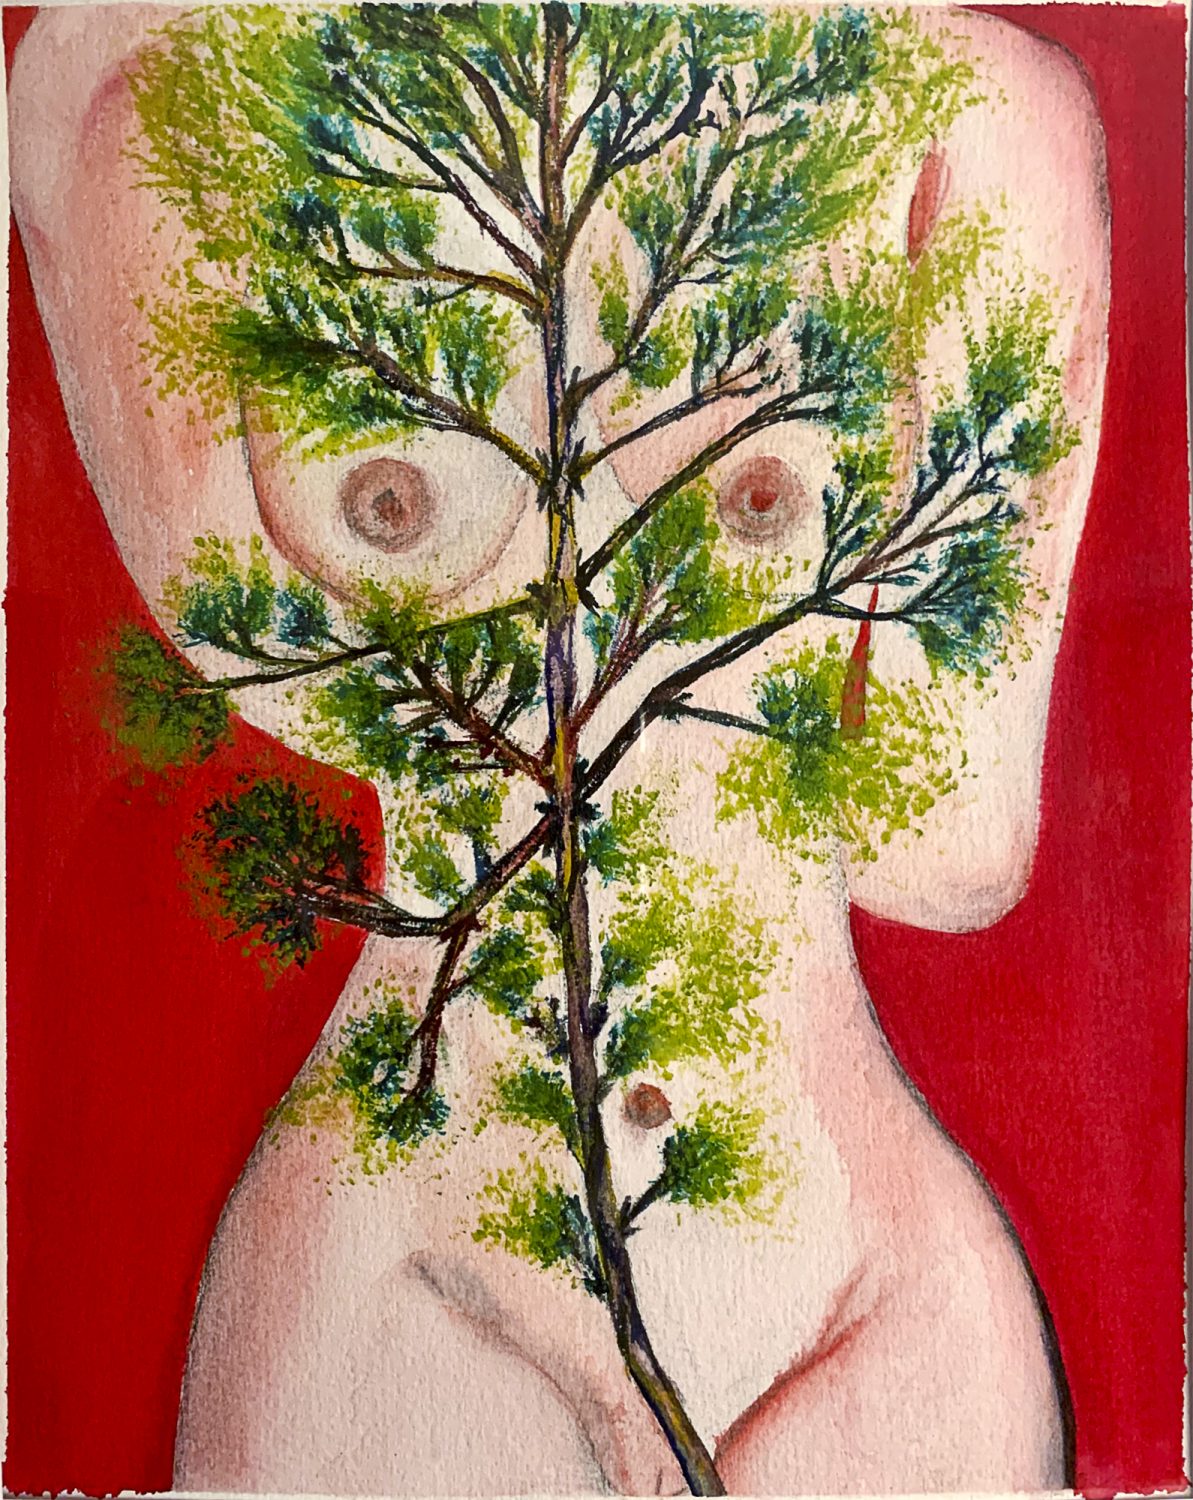 Paining of Nude Torso against Red with Tree in Front